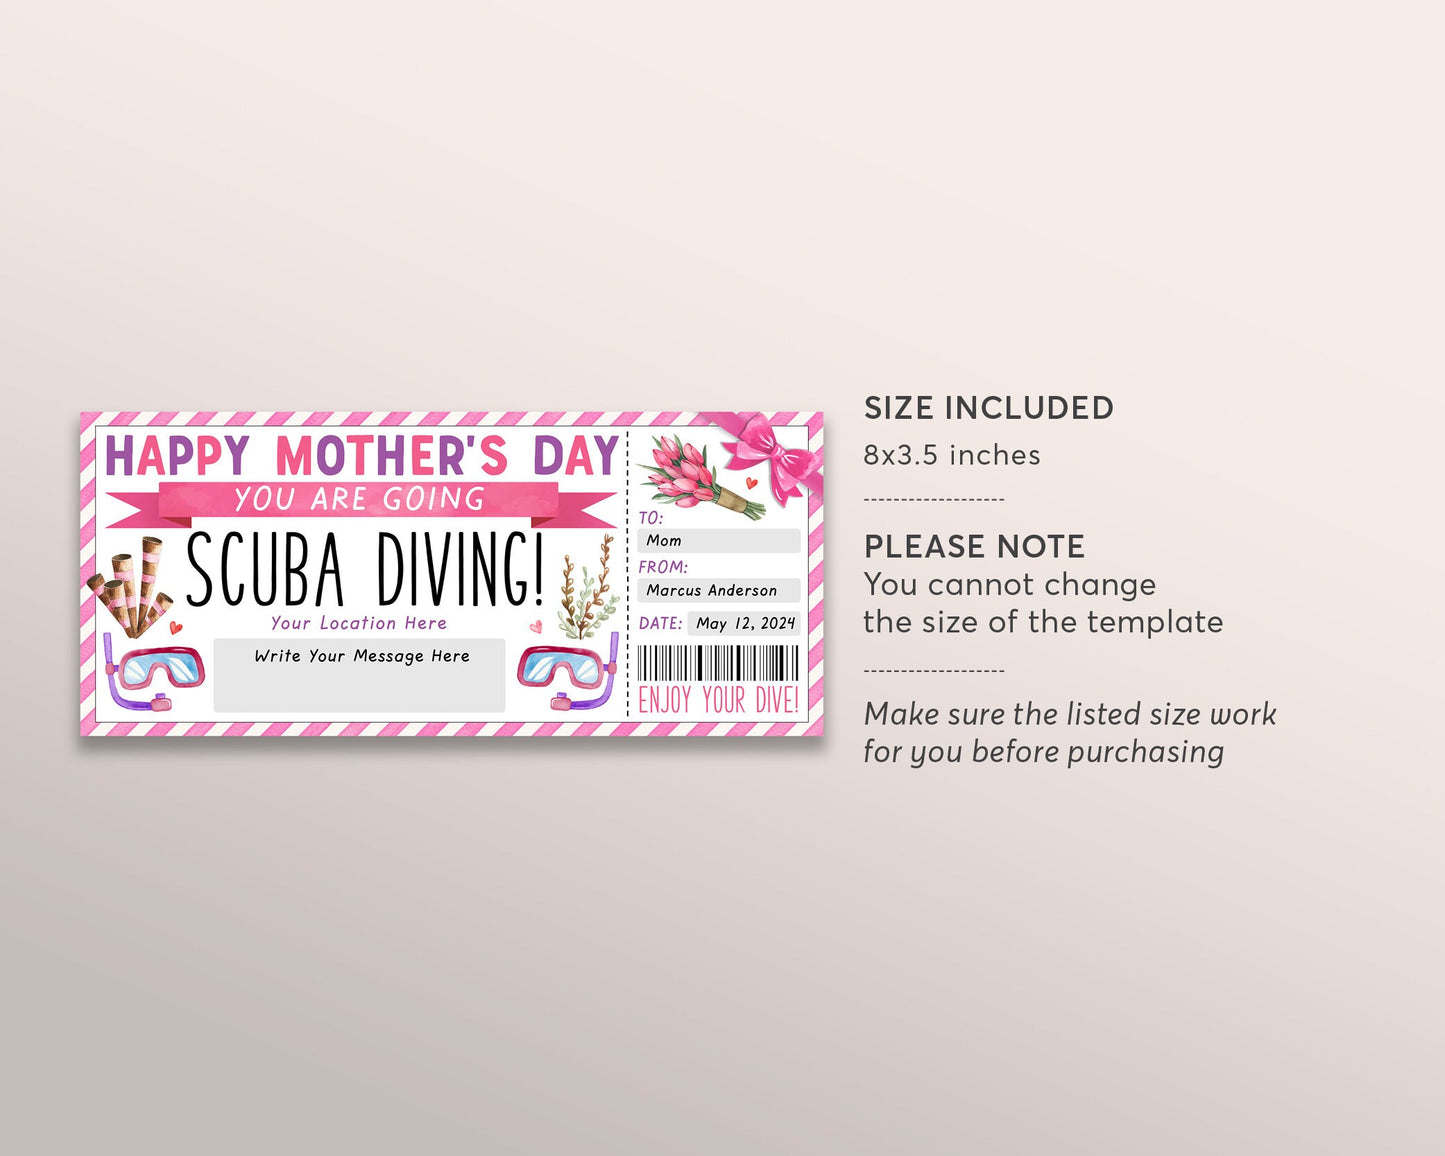 Mothers Day Scuba Diving Ticket Editable Template, Snorkeling Experience Reveal Gift Voucher For Mom, Deep Sea Diving Trip Gift Certificate